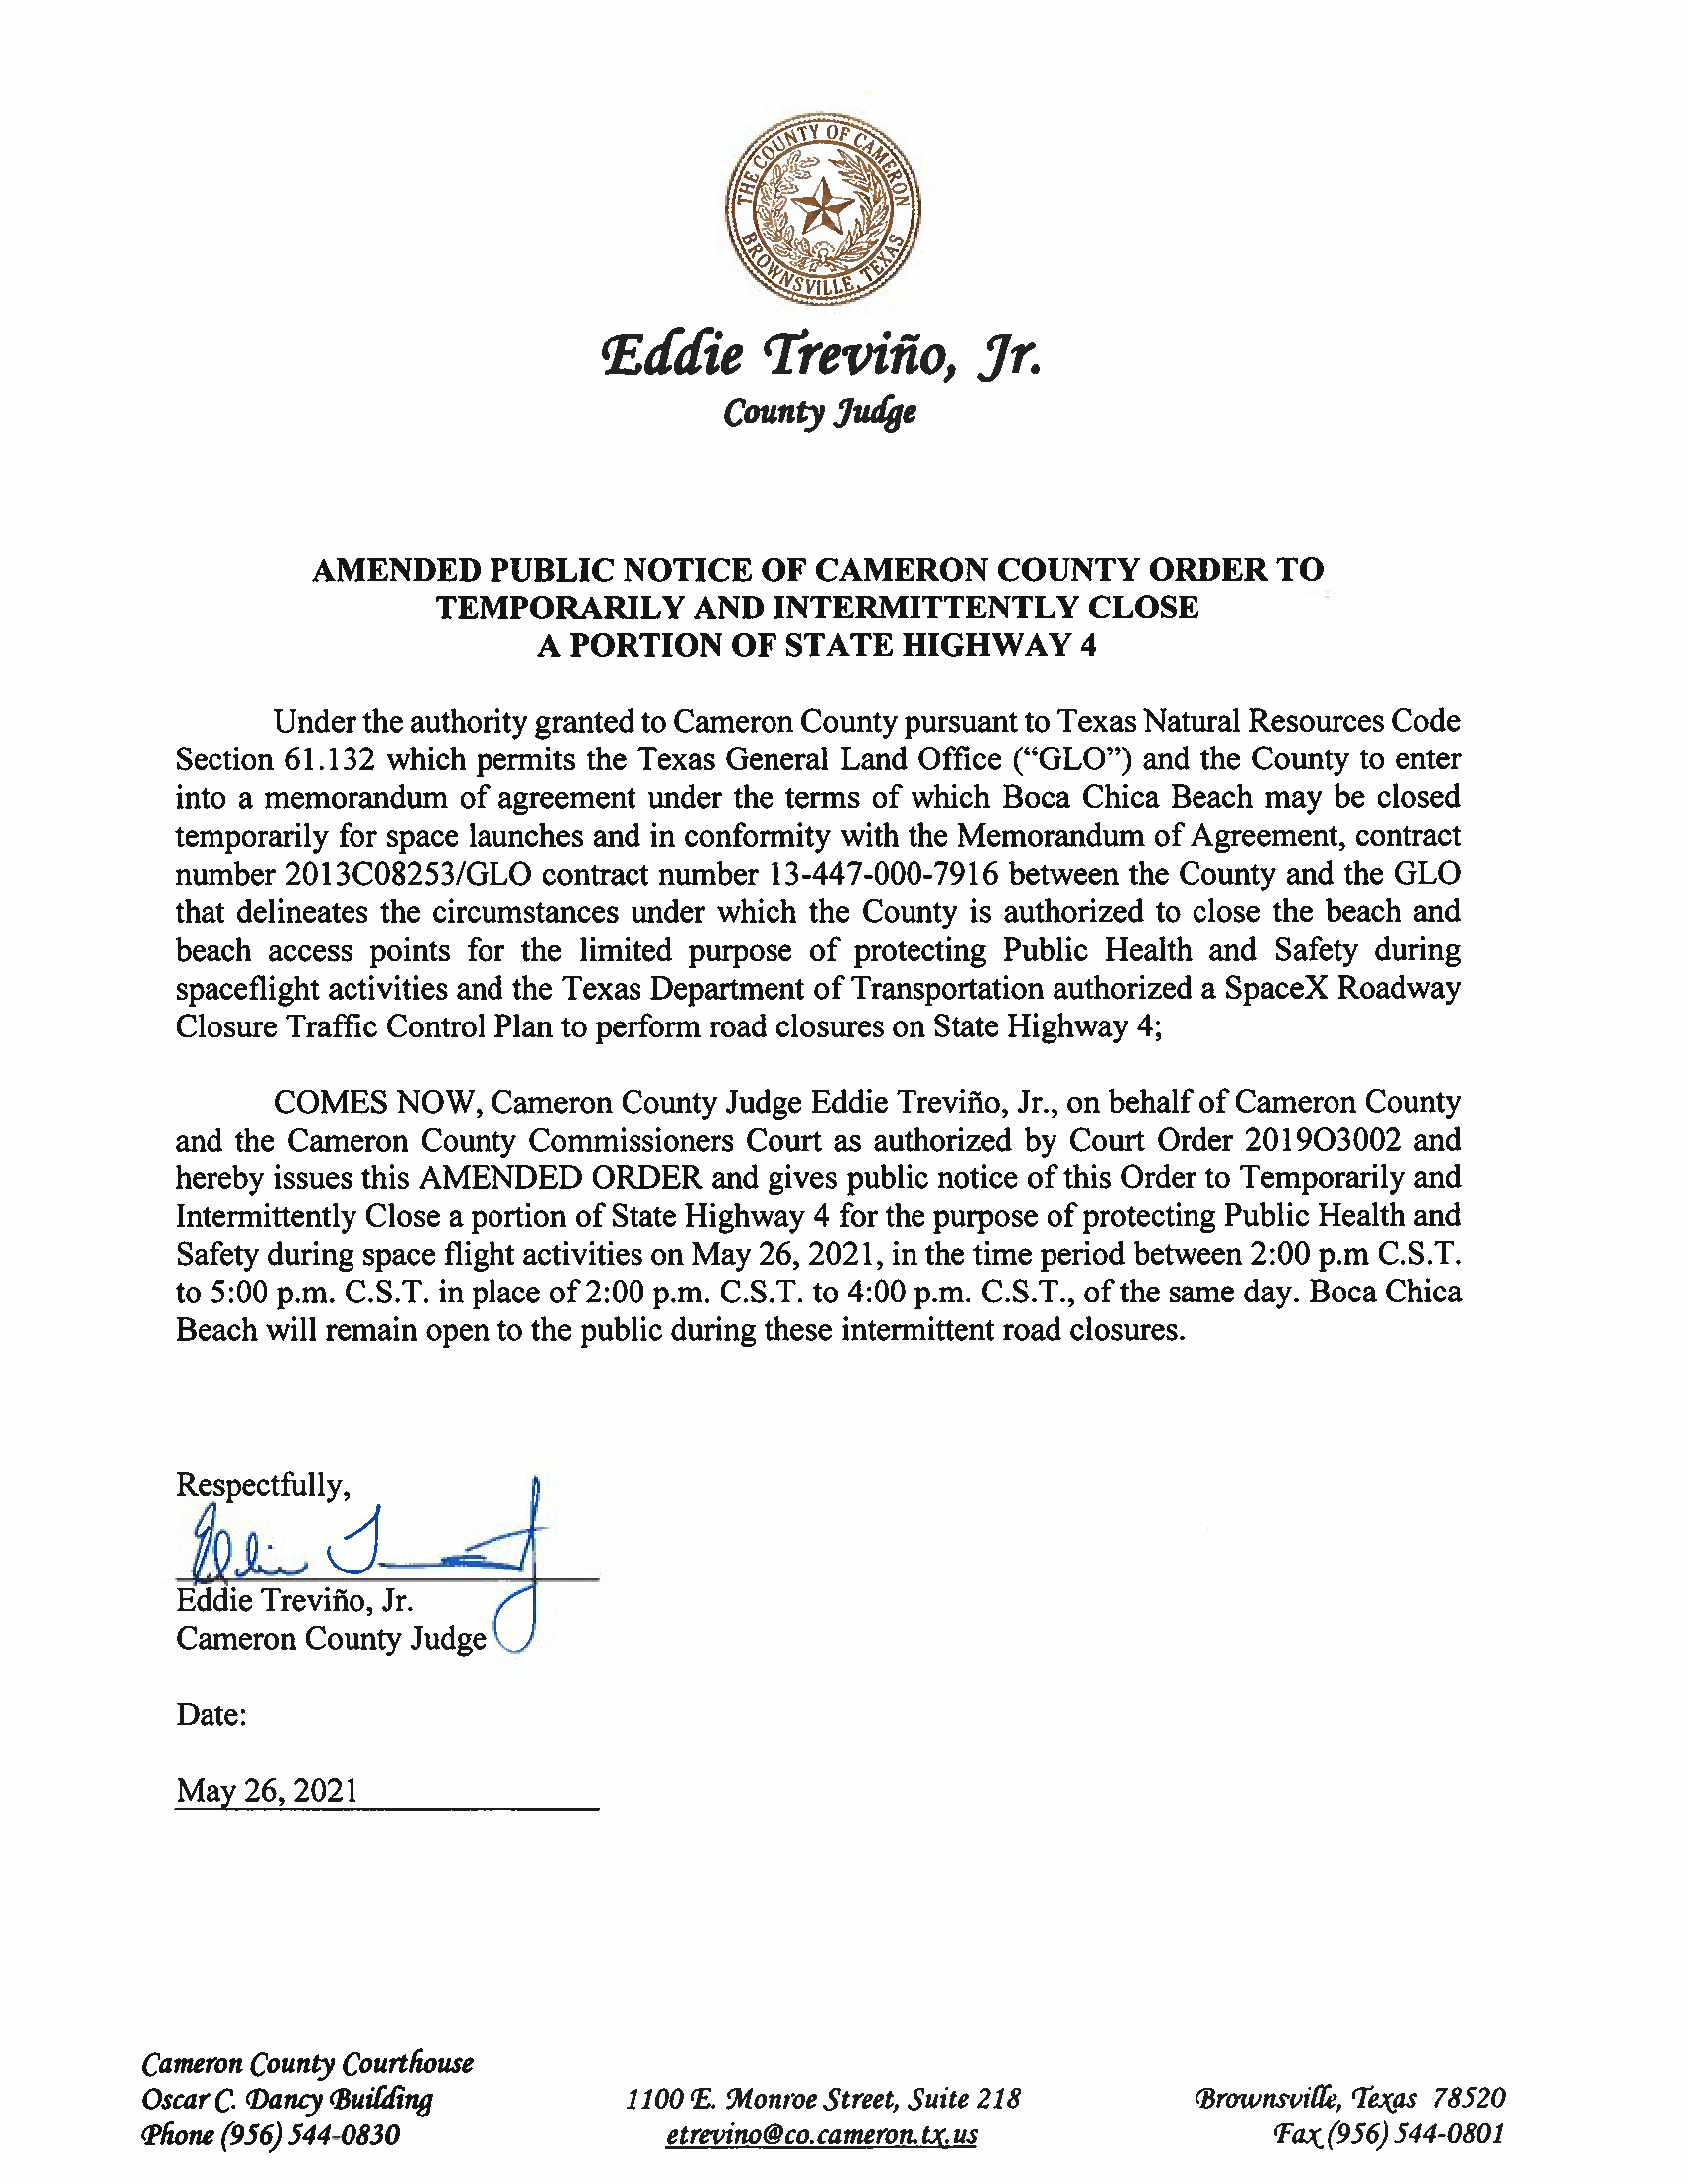 AMENDED PUBLIC NOTICE OF CAMERON COUNTY ORDER TO TEMP. ROAD CLOSURE. 05.26.2021